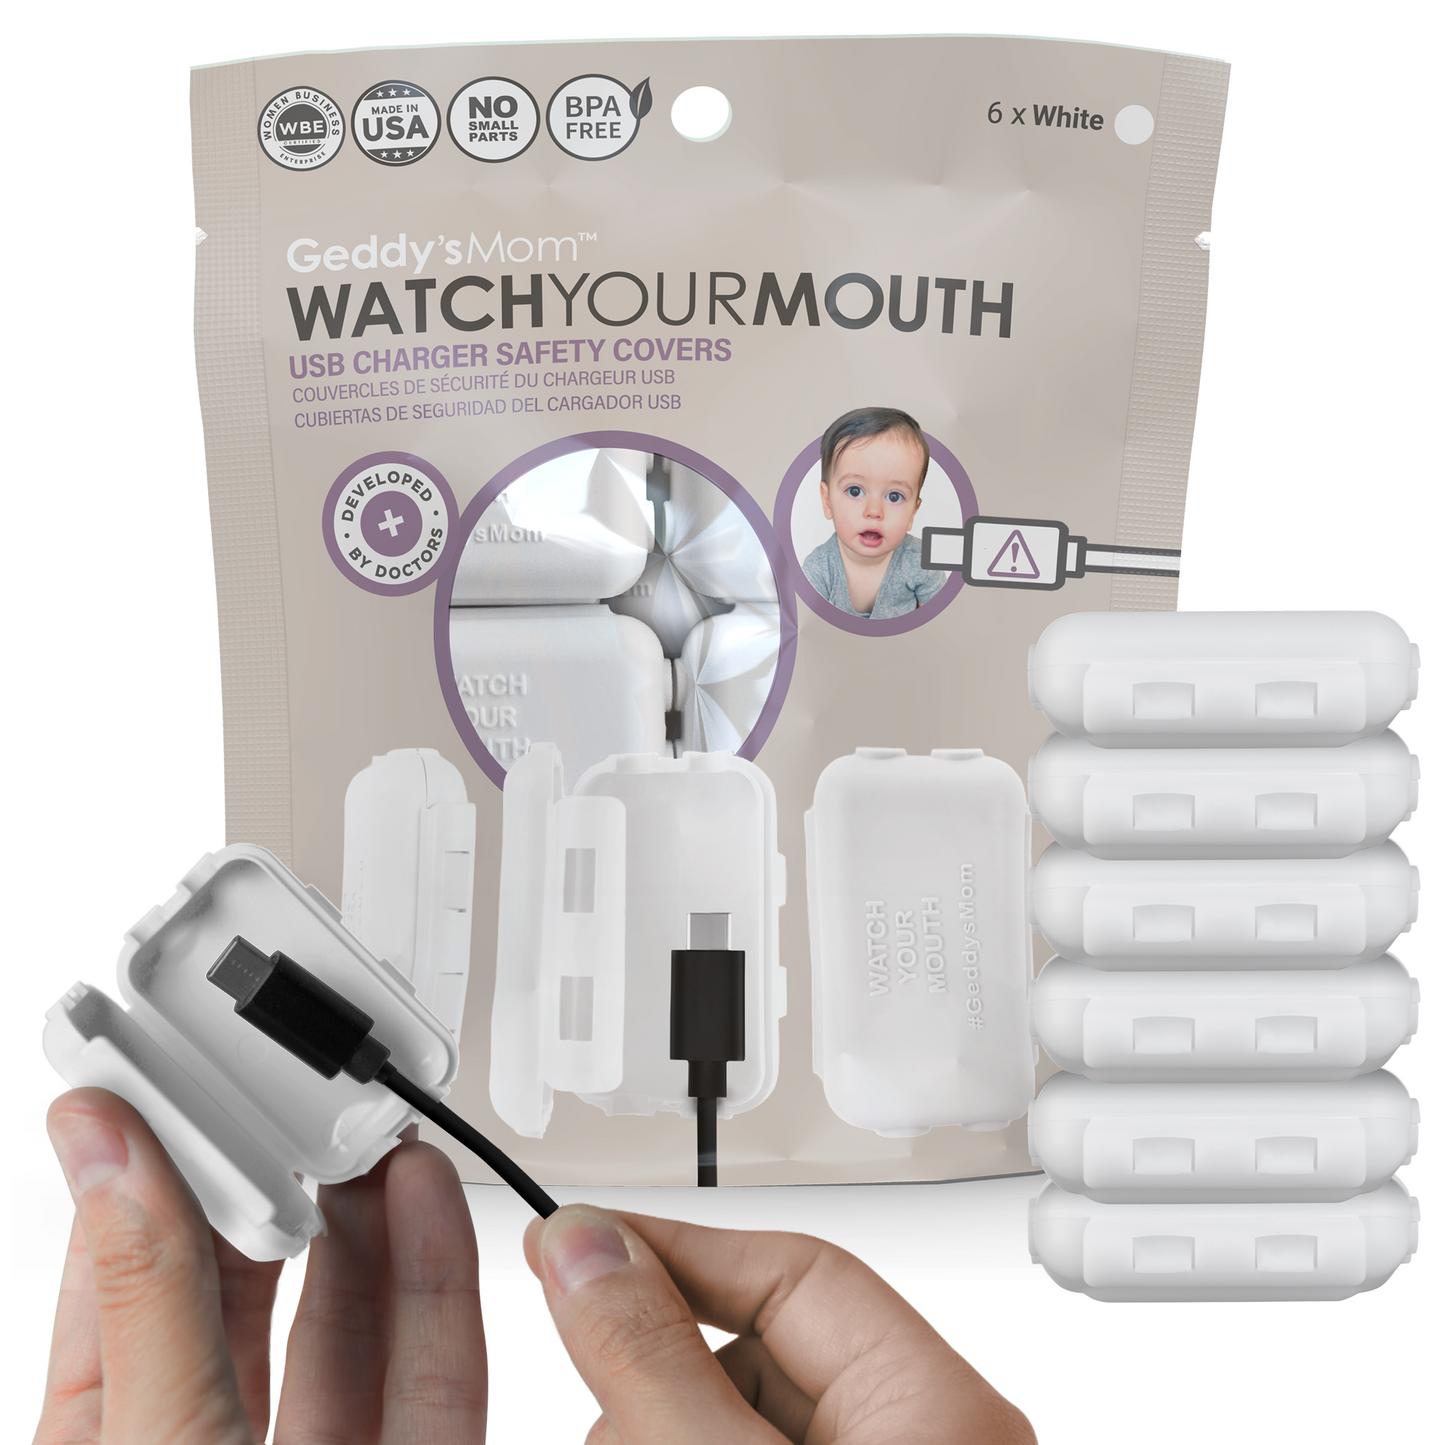 WATCH YOUR MOUTH 6-PACK